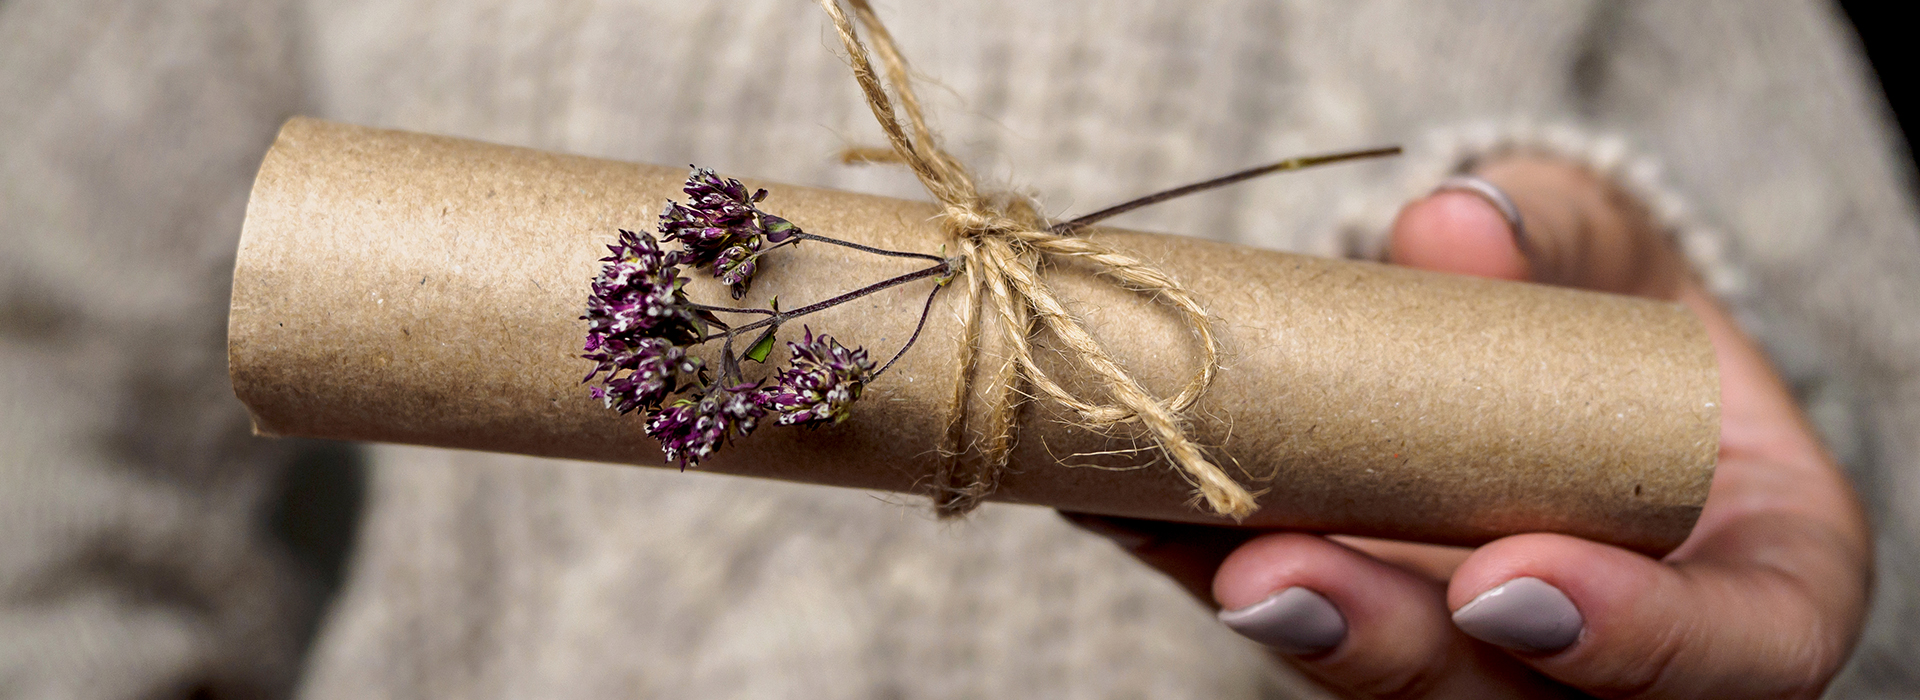 Woman giving custom wrapped gift with flowers for the holidays